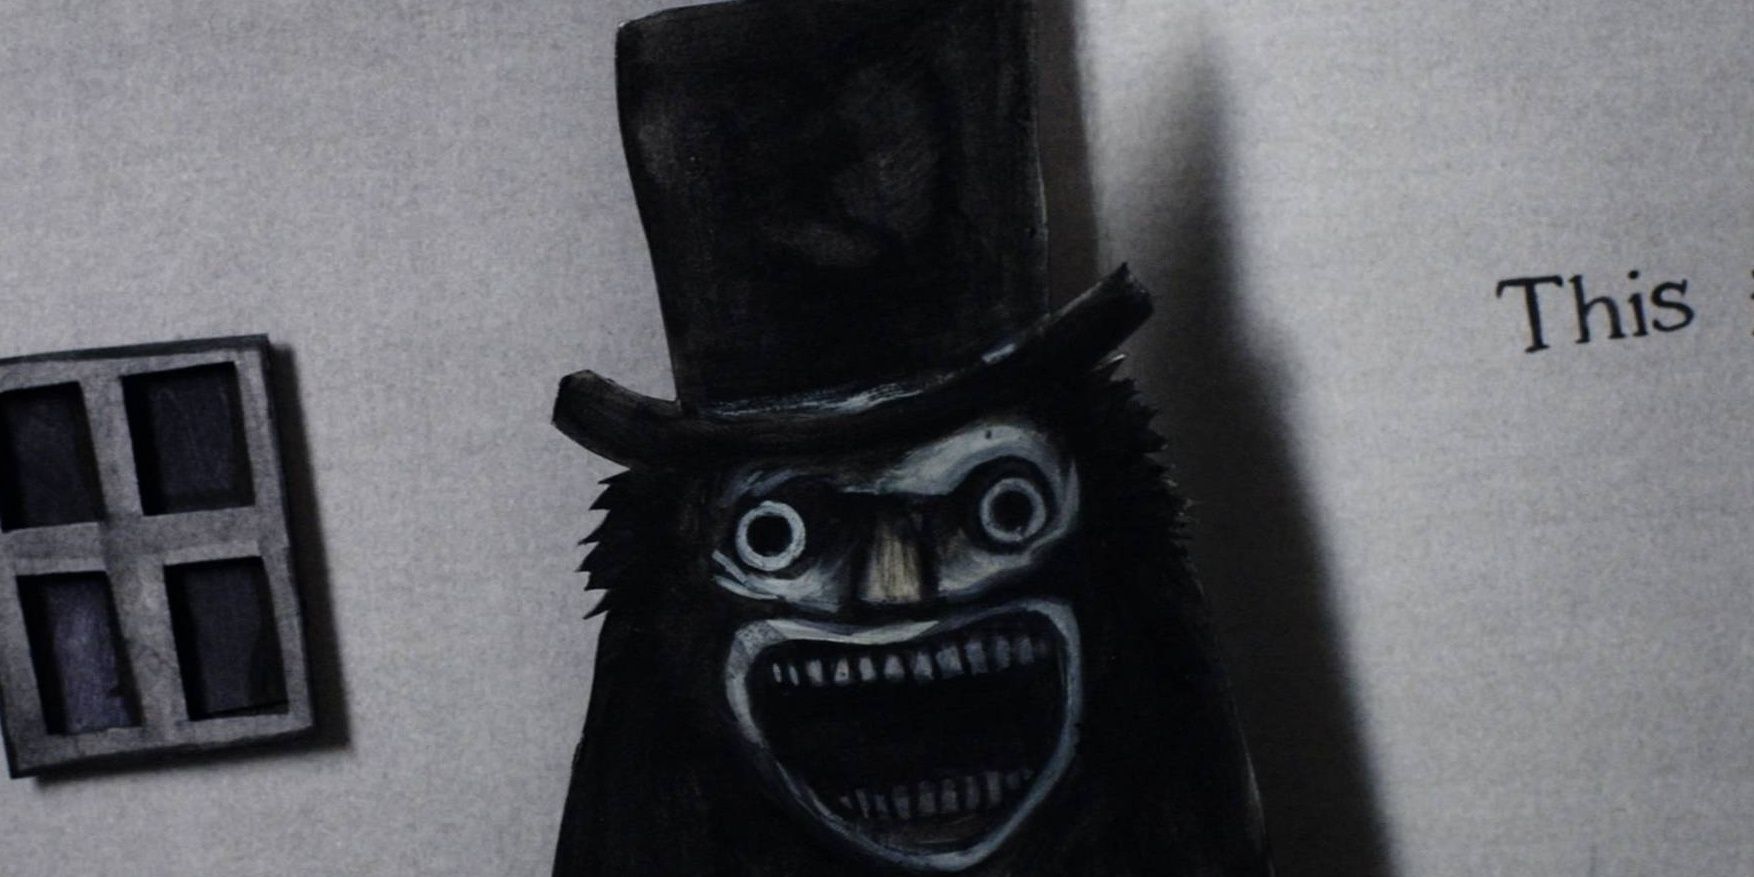 A pop up image of The Babadook